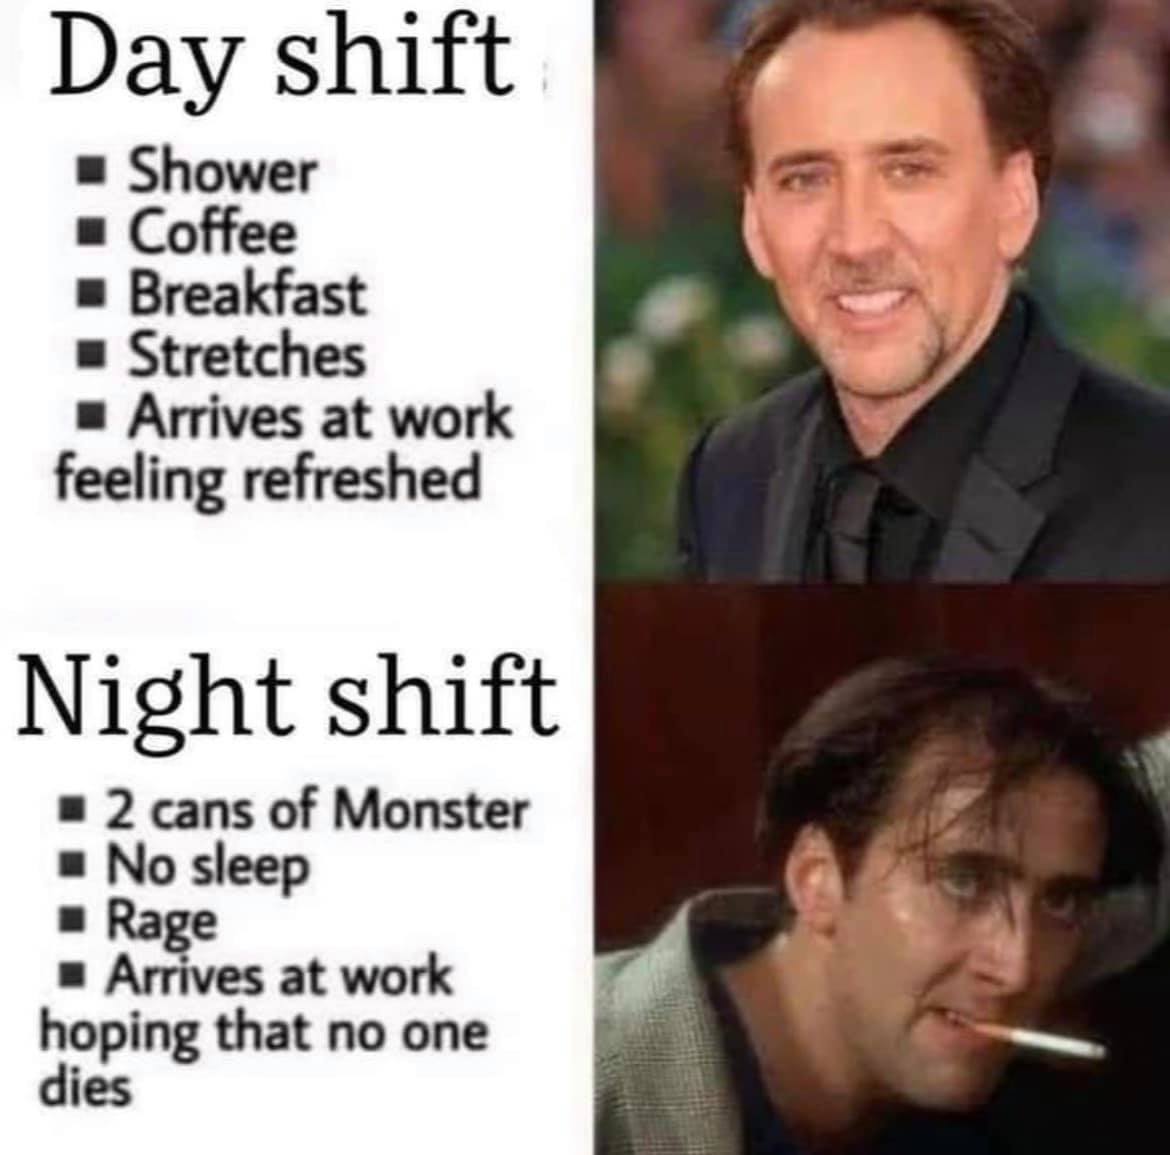 trade worker memes - Day shift Shower Coffee Breakfast Stretches Arrives at work feeling refreshed Night shift 2 cans of Monster No sleep Rage Arrives at work hoping that no one dies